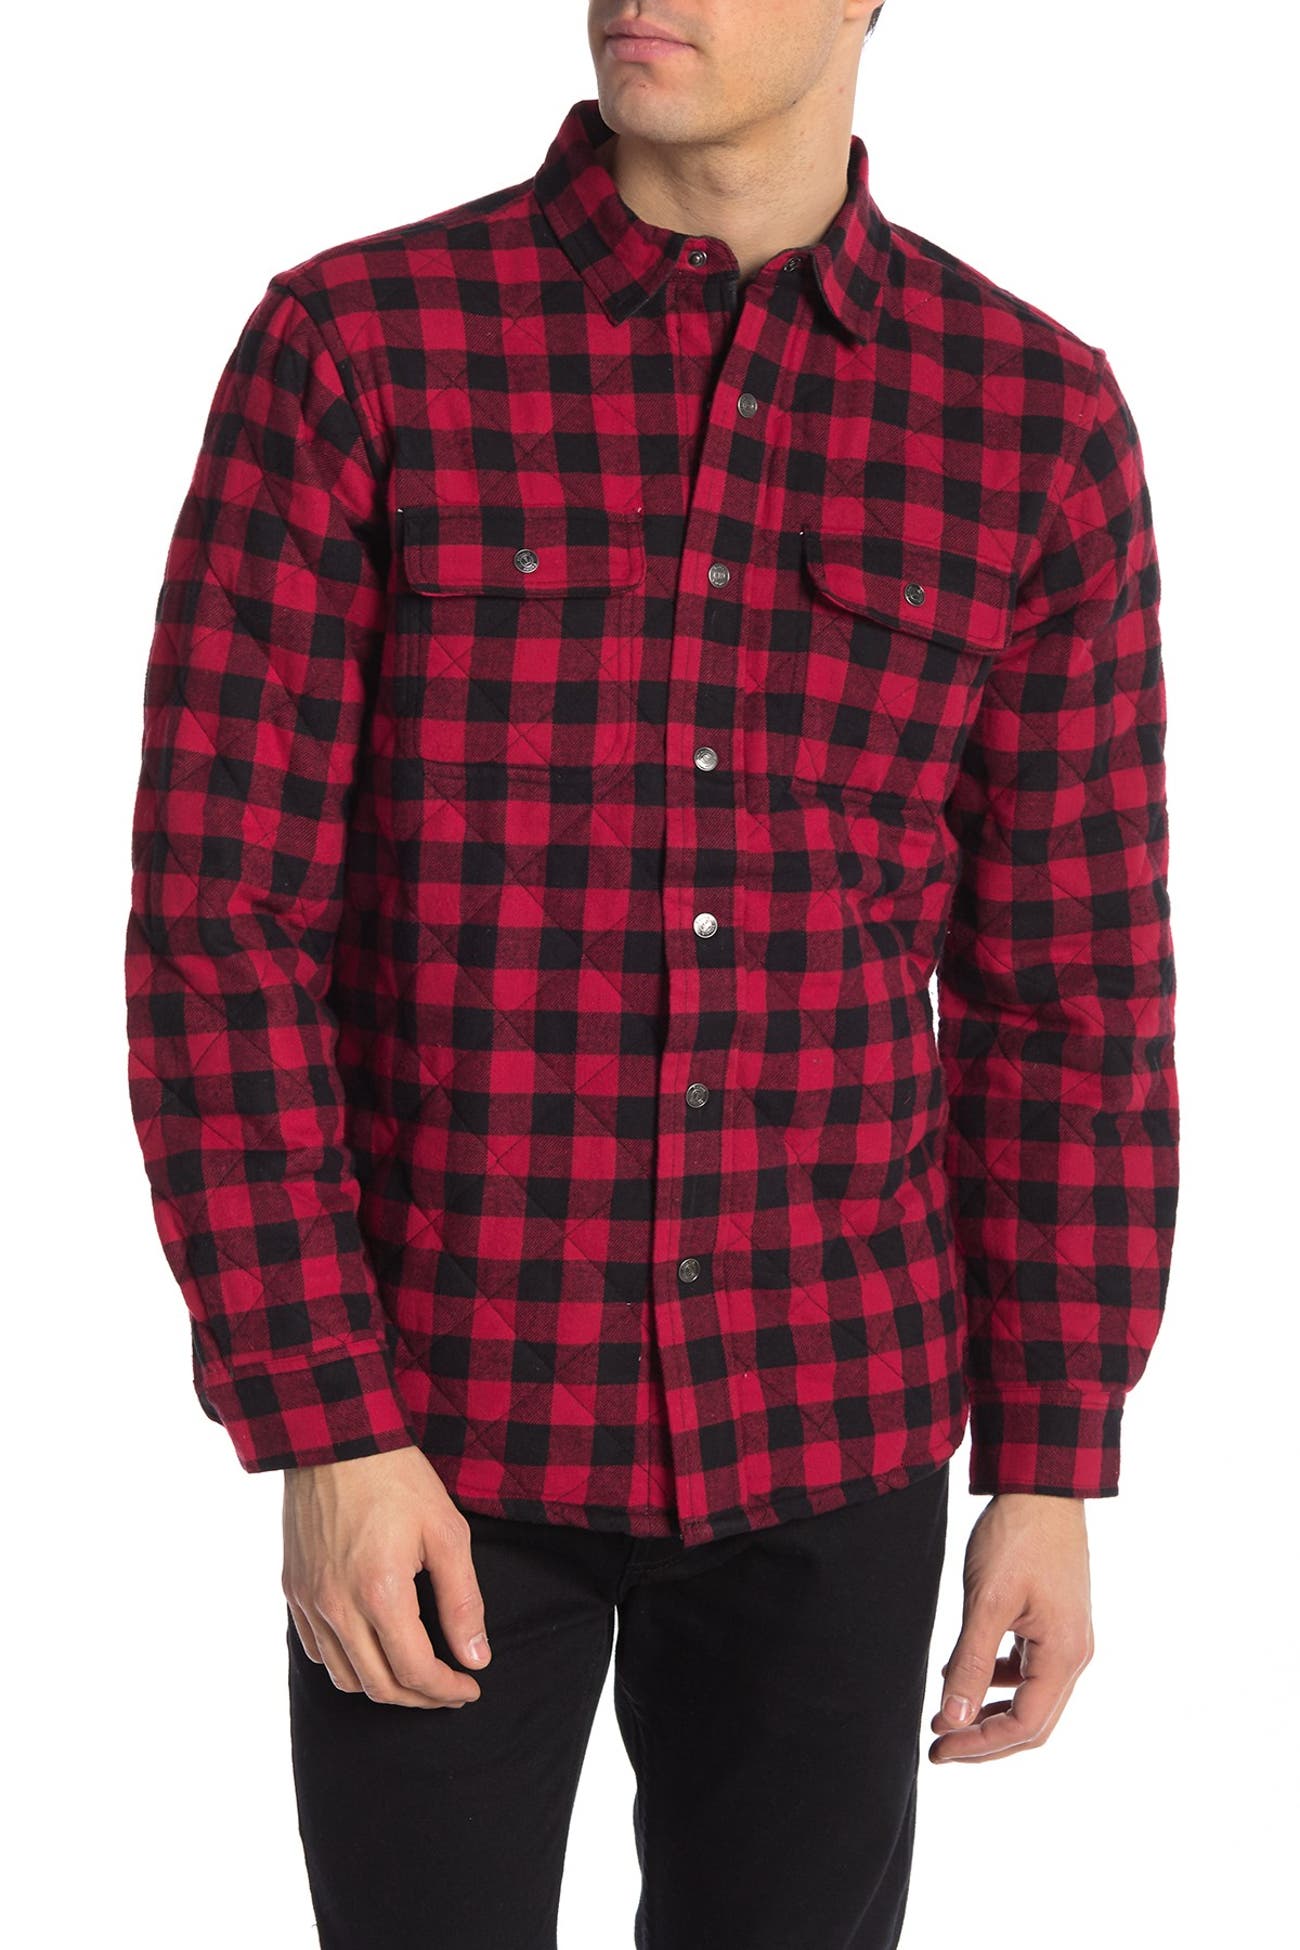 Tailor Vintage | Plaid Quilted Reversible Woven Shirt Jackets ...